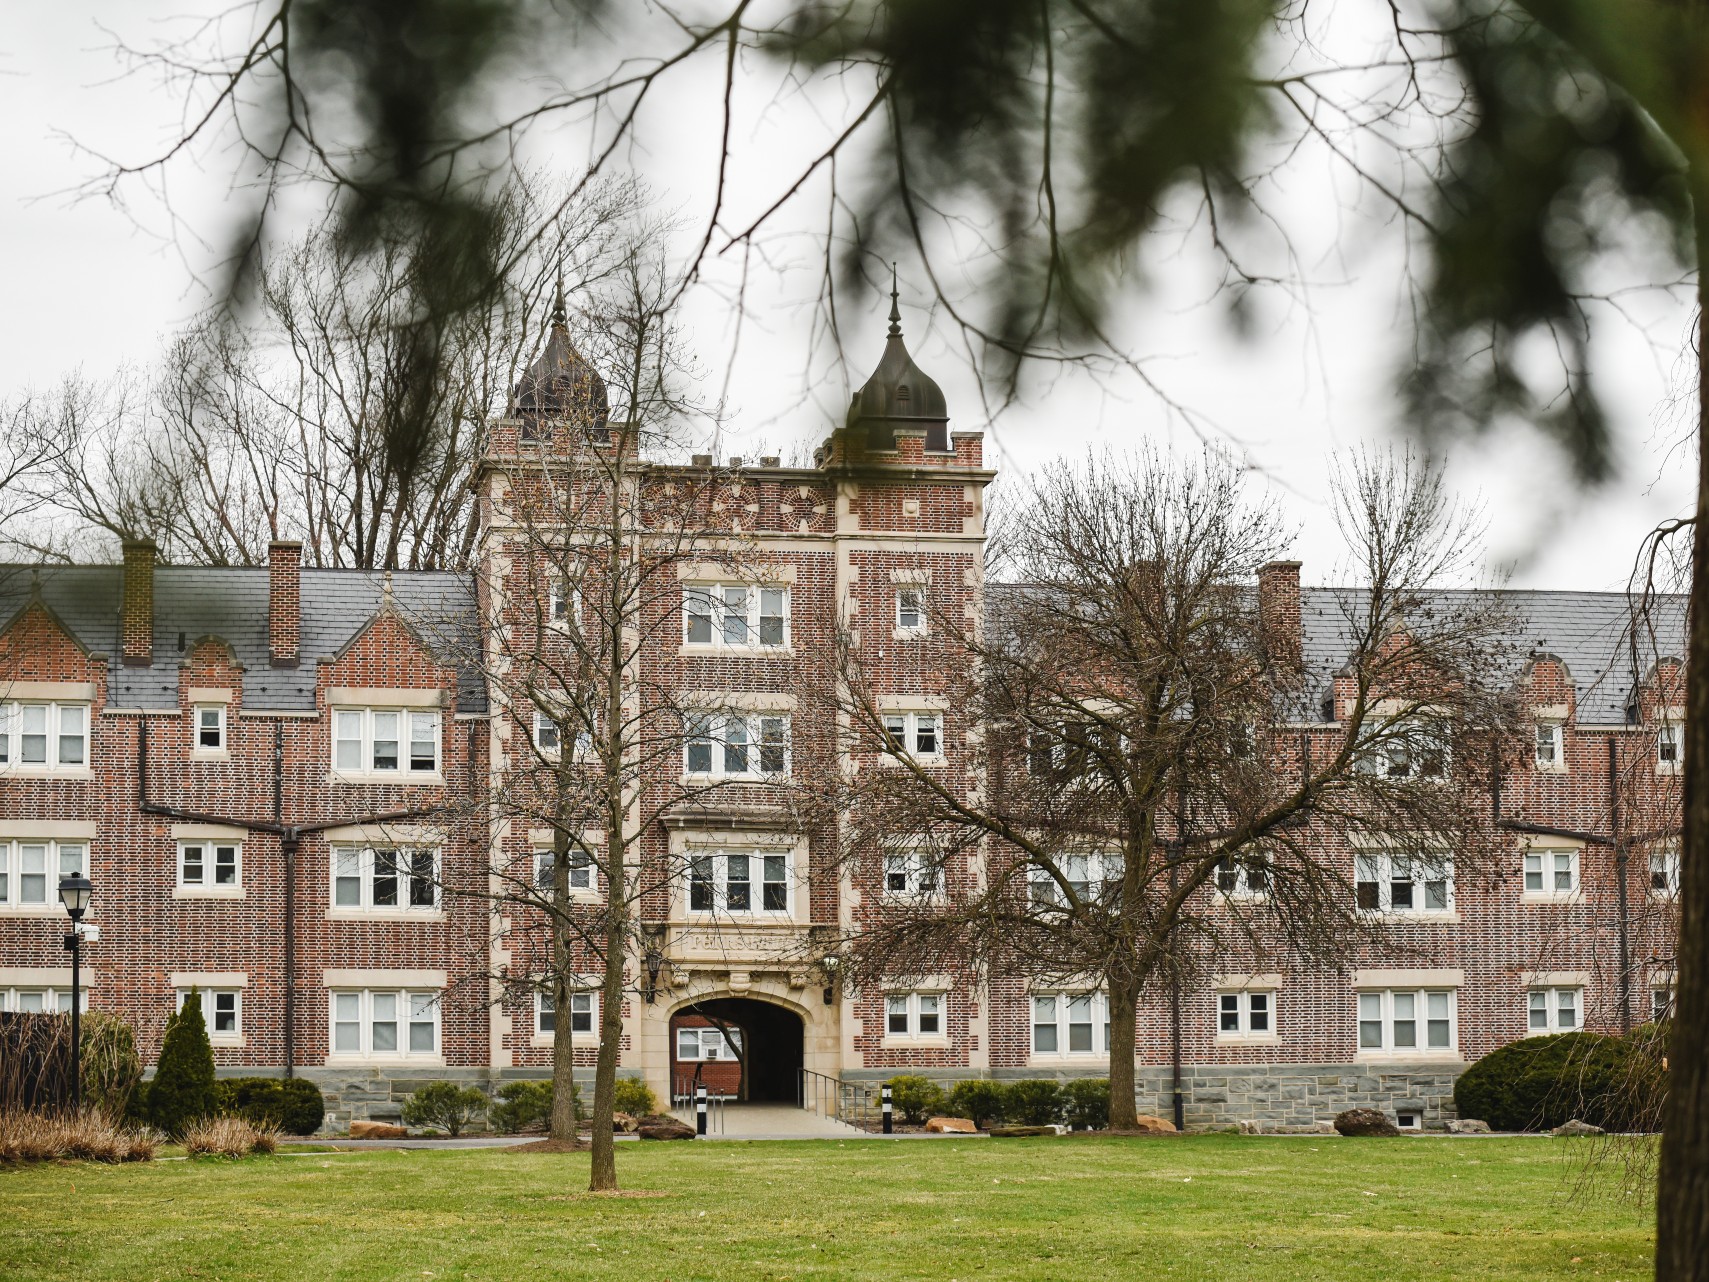 A brown brick college residence hall stands under overcast skies.